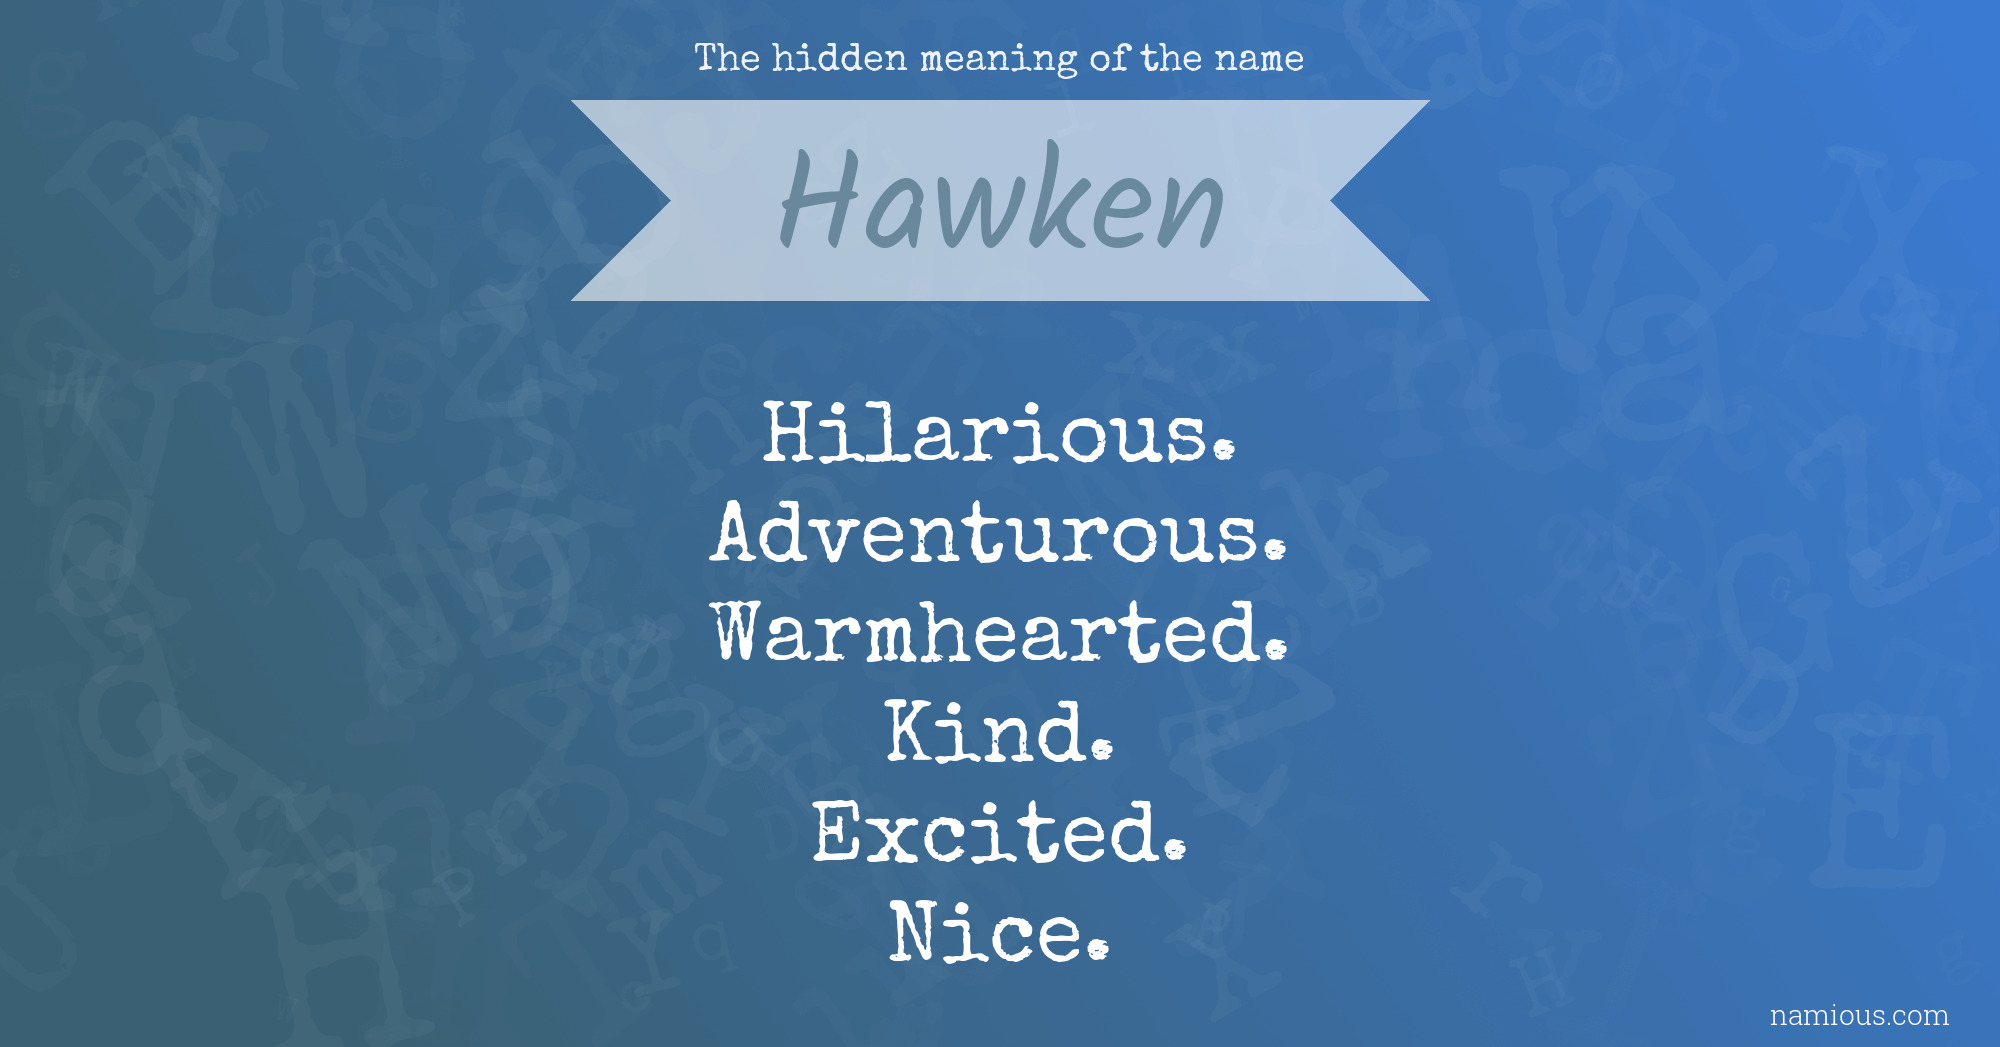 The hidden meaning of the name Hawken